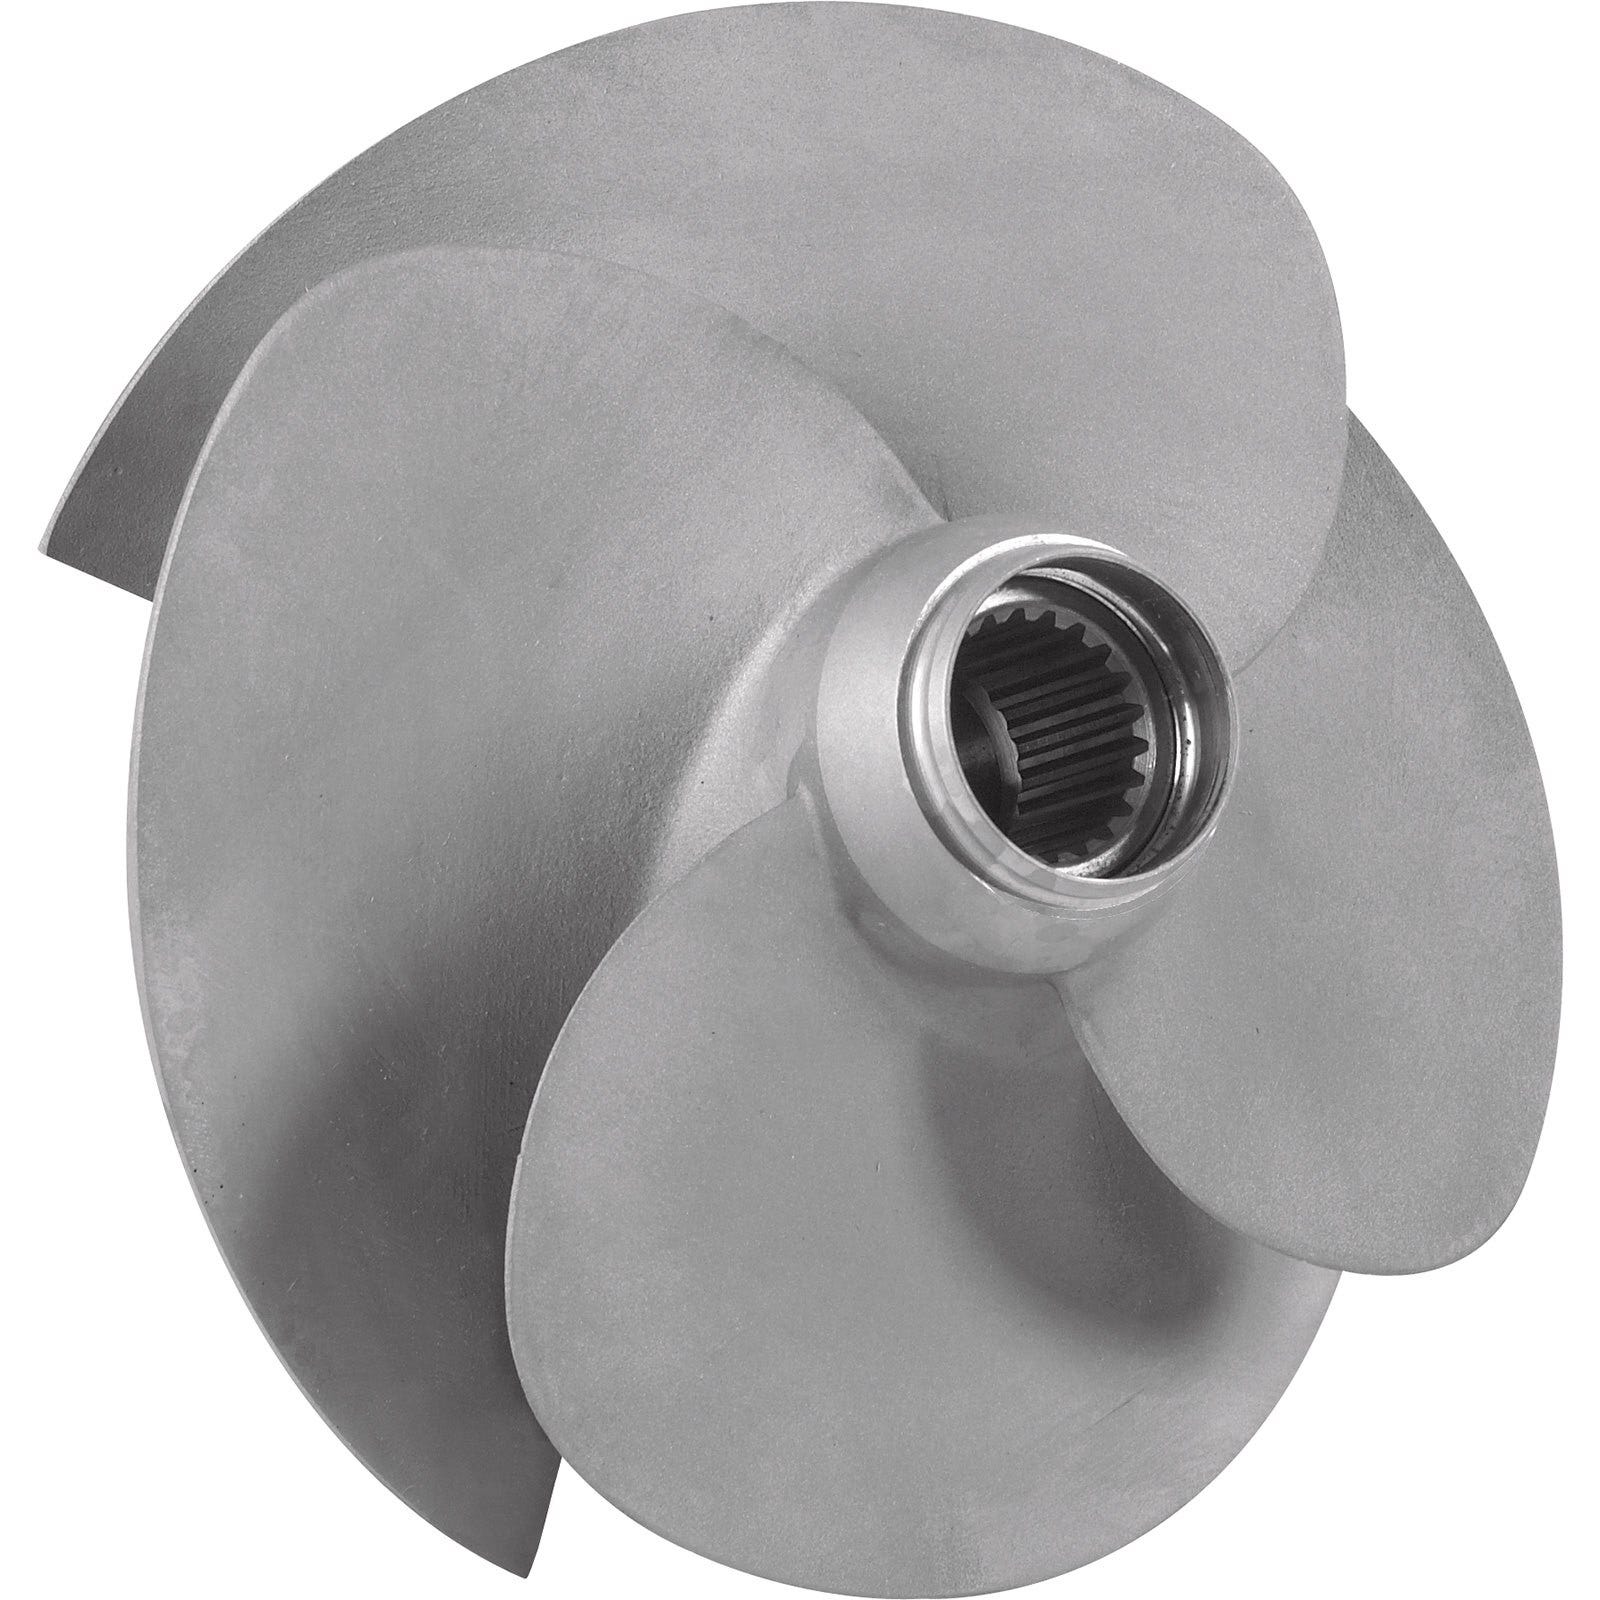 GTX 155 and WAKE 155 (2018-2019) Impeller - 267001019 - The Parts Lodge